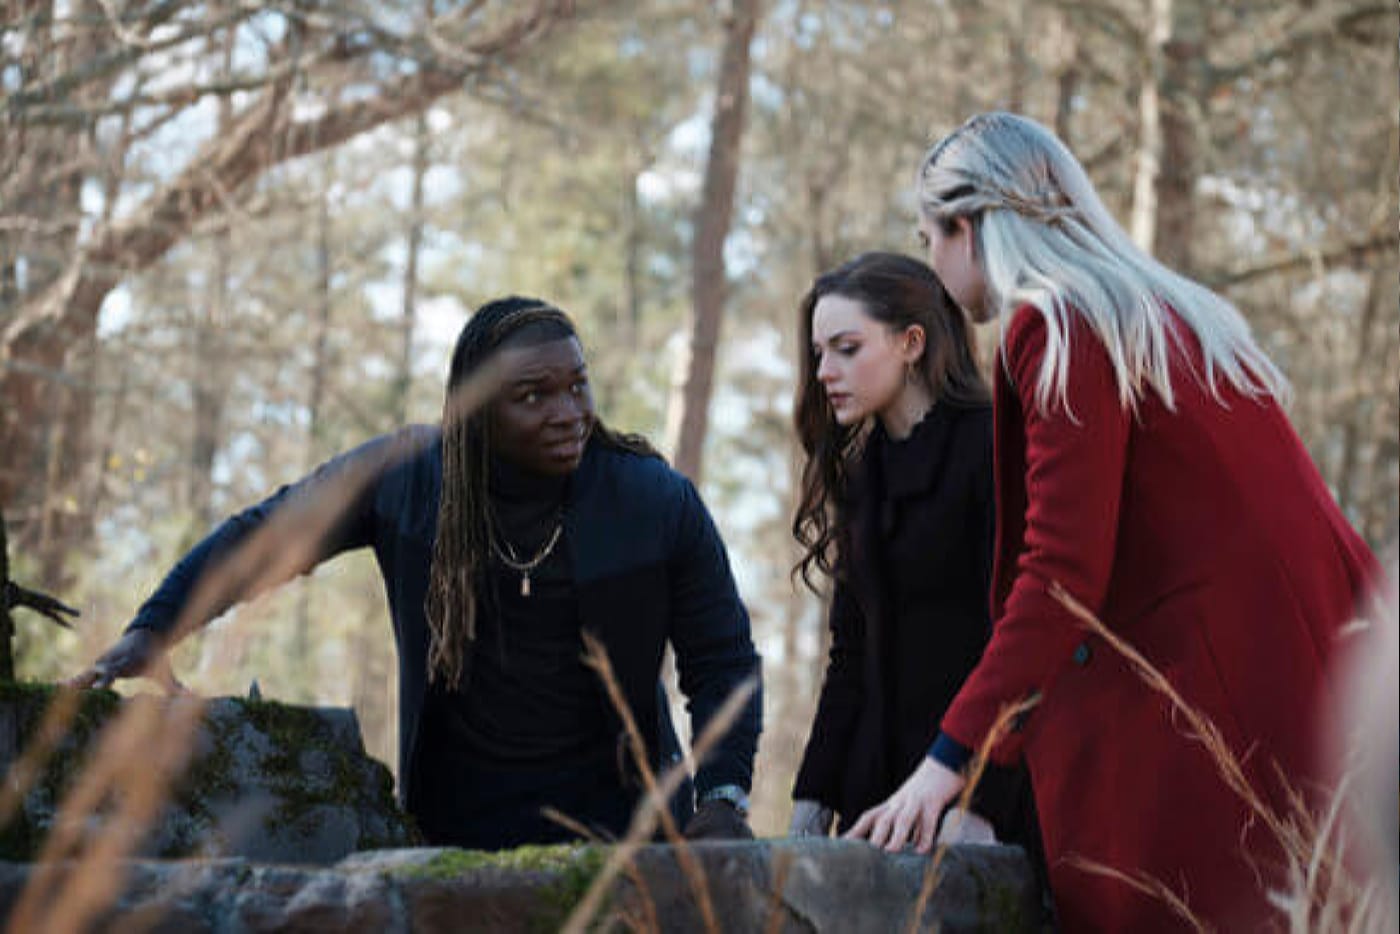 Legacies: Do All Malivore Monsters Provide This Level of Emotional Insight? | Season 3 | Episode 9